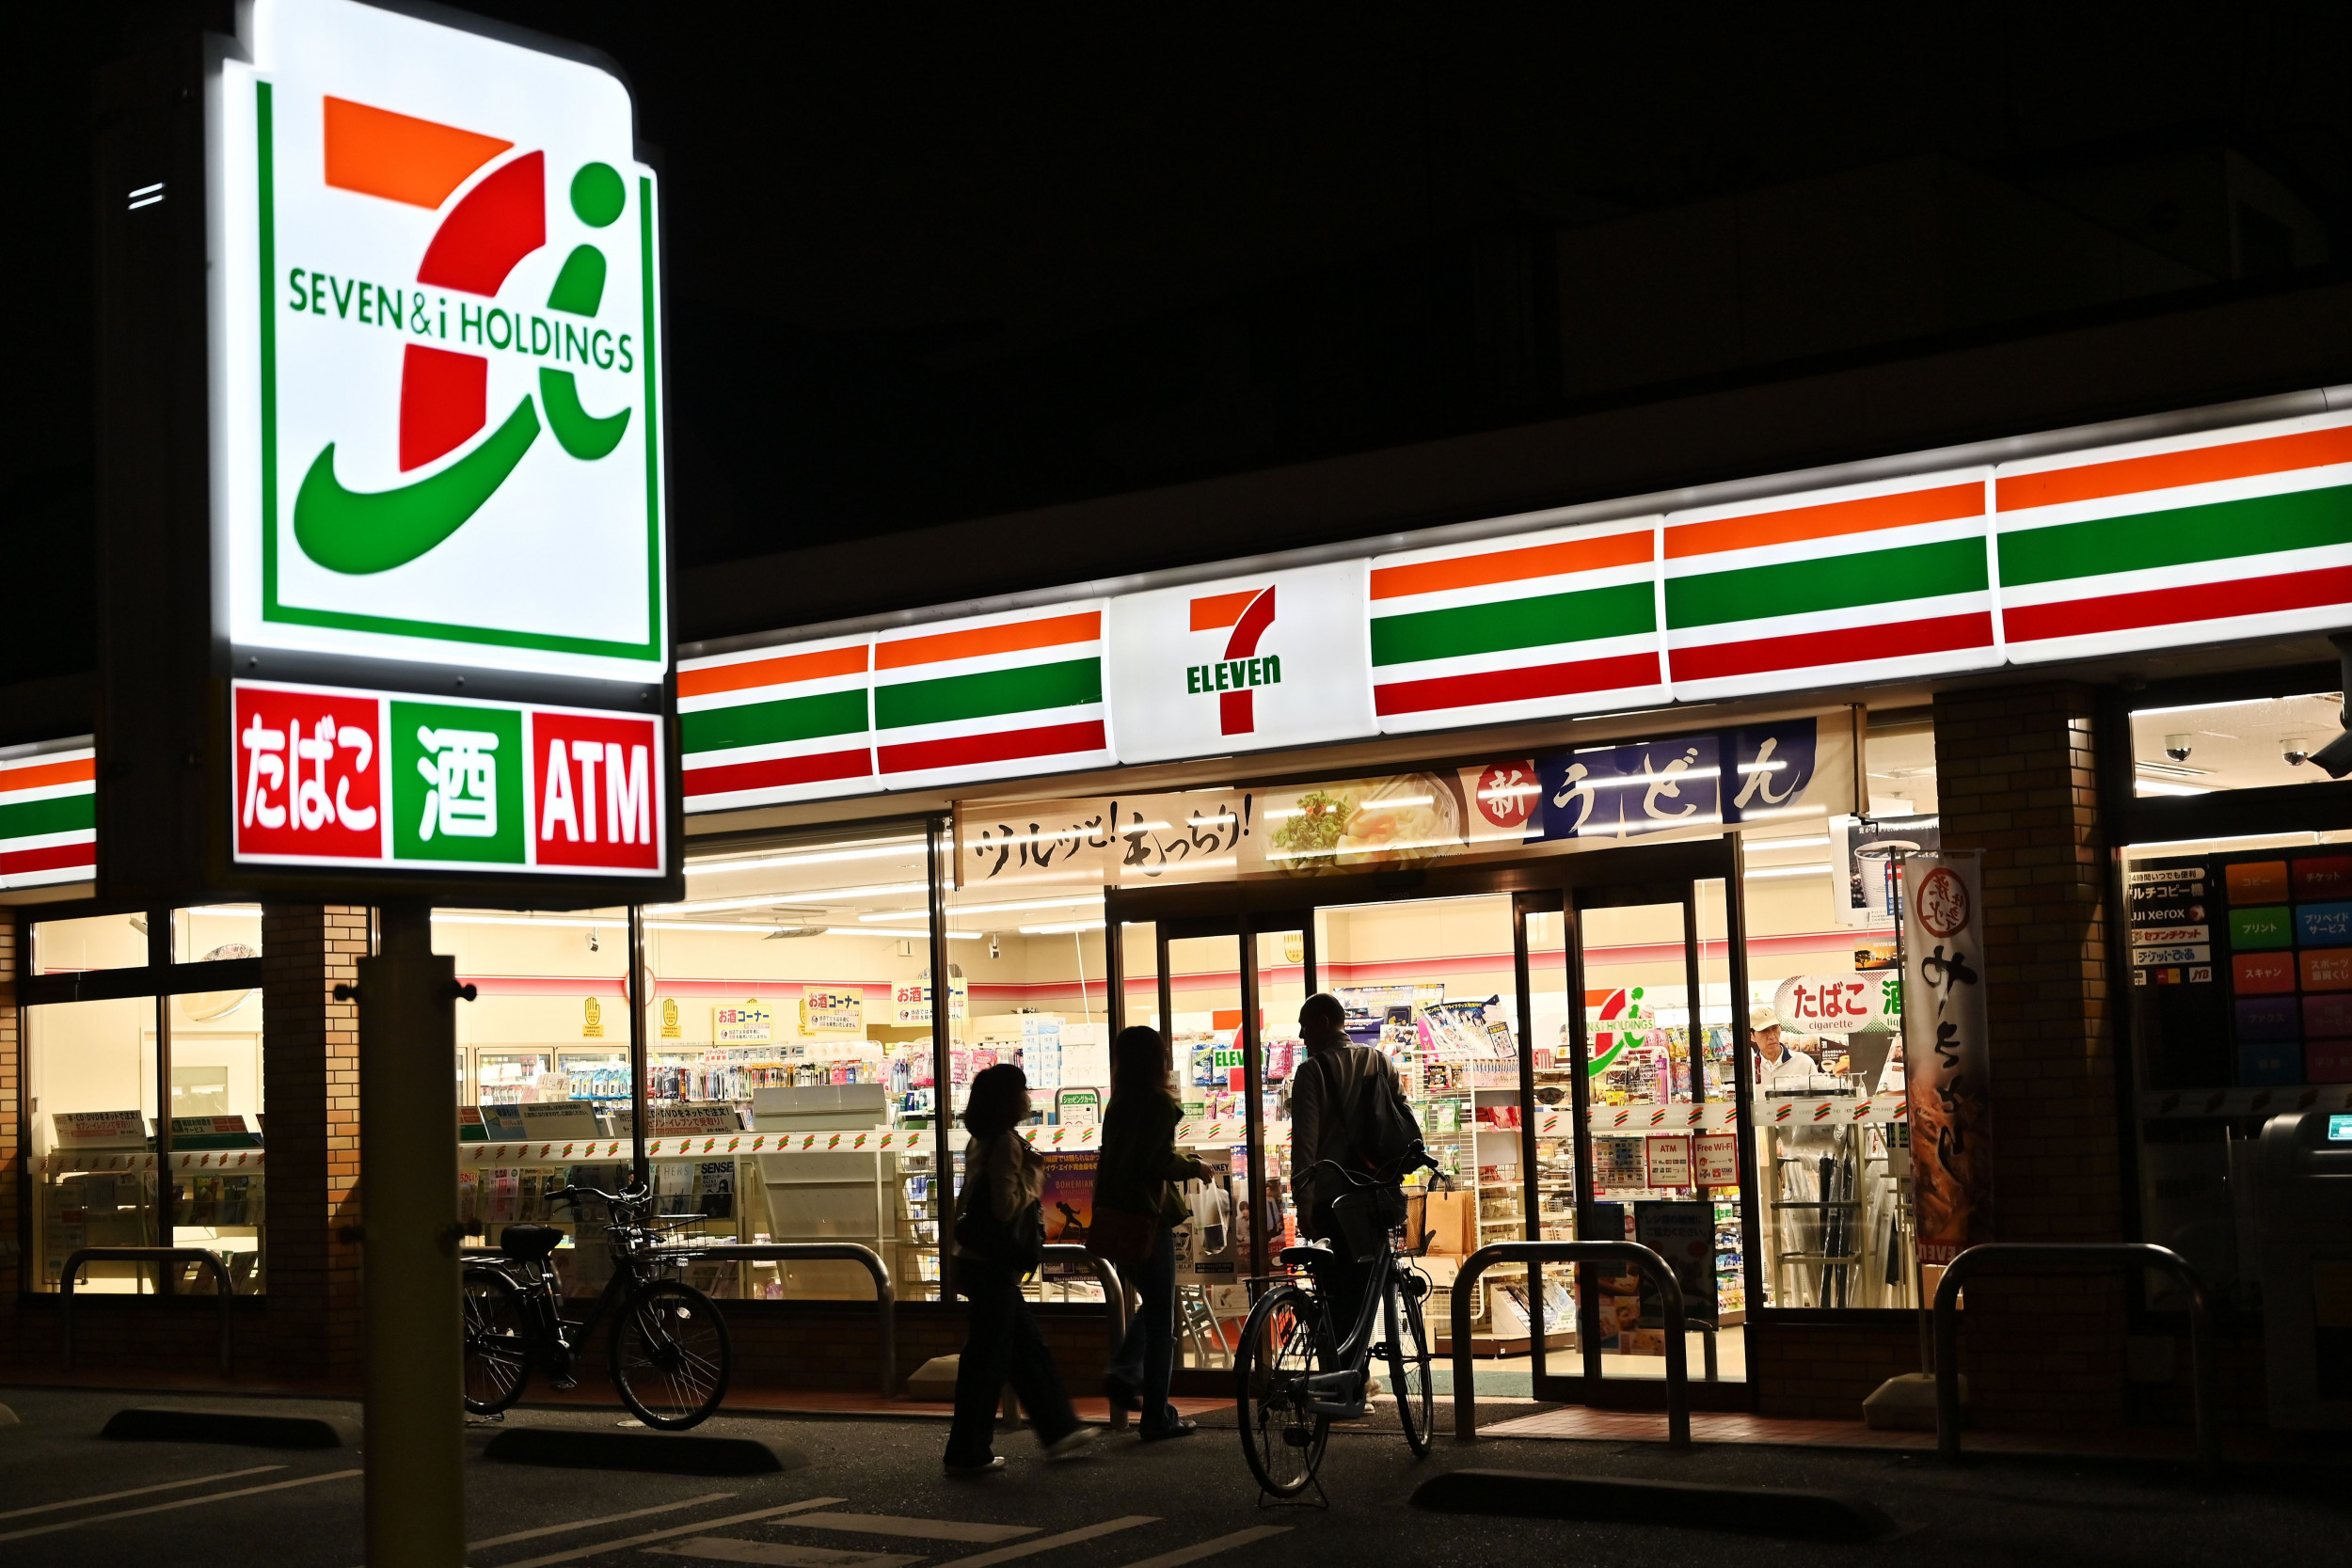 I Want to Go': Viewers Shocked by 'Heaven' That Is 7-Eleven in Japan